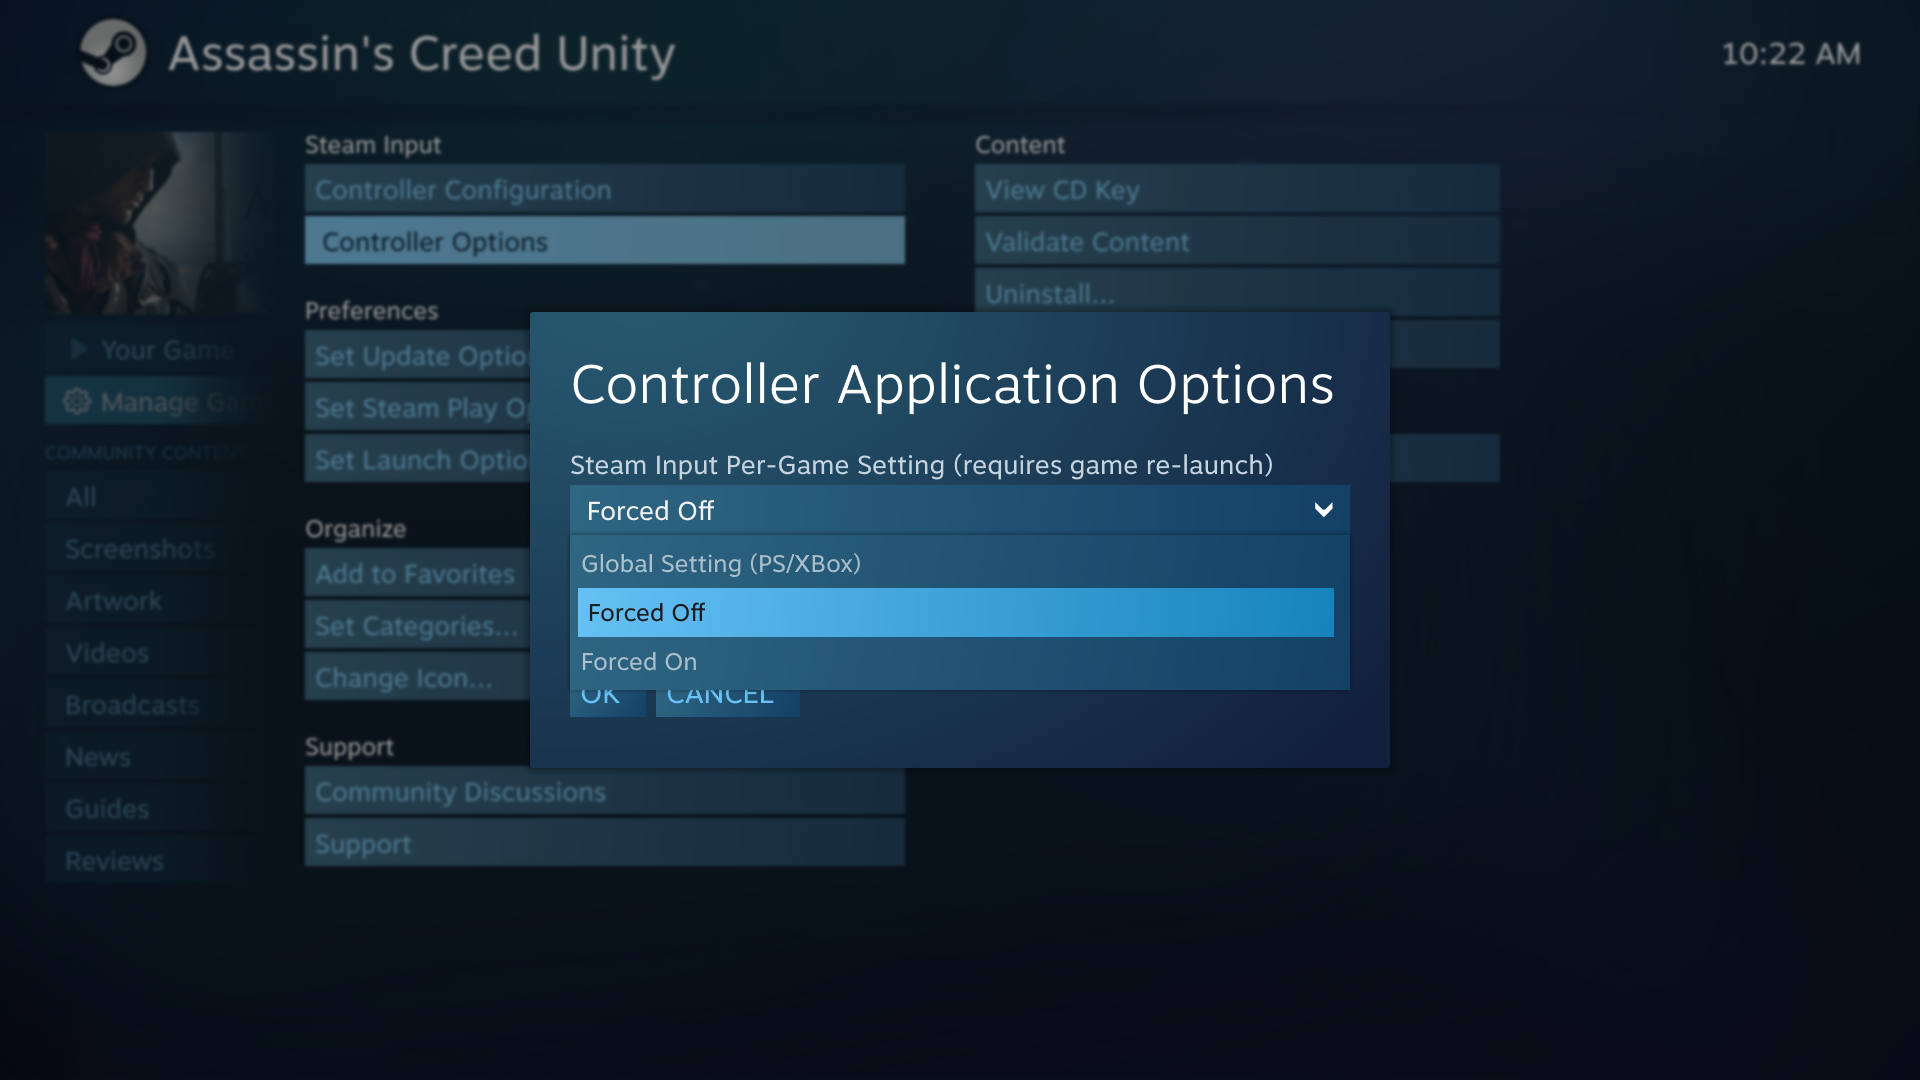 Assassin's Creed Unity Playstation Button Prompts with DS4 v2 Controller - Step 1: Disabling Steam Input - A736433